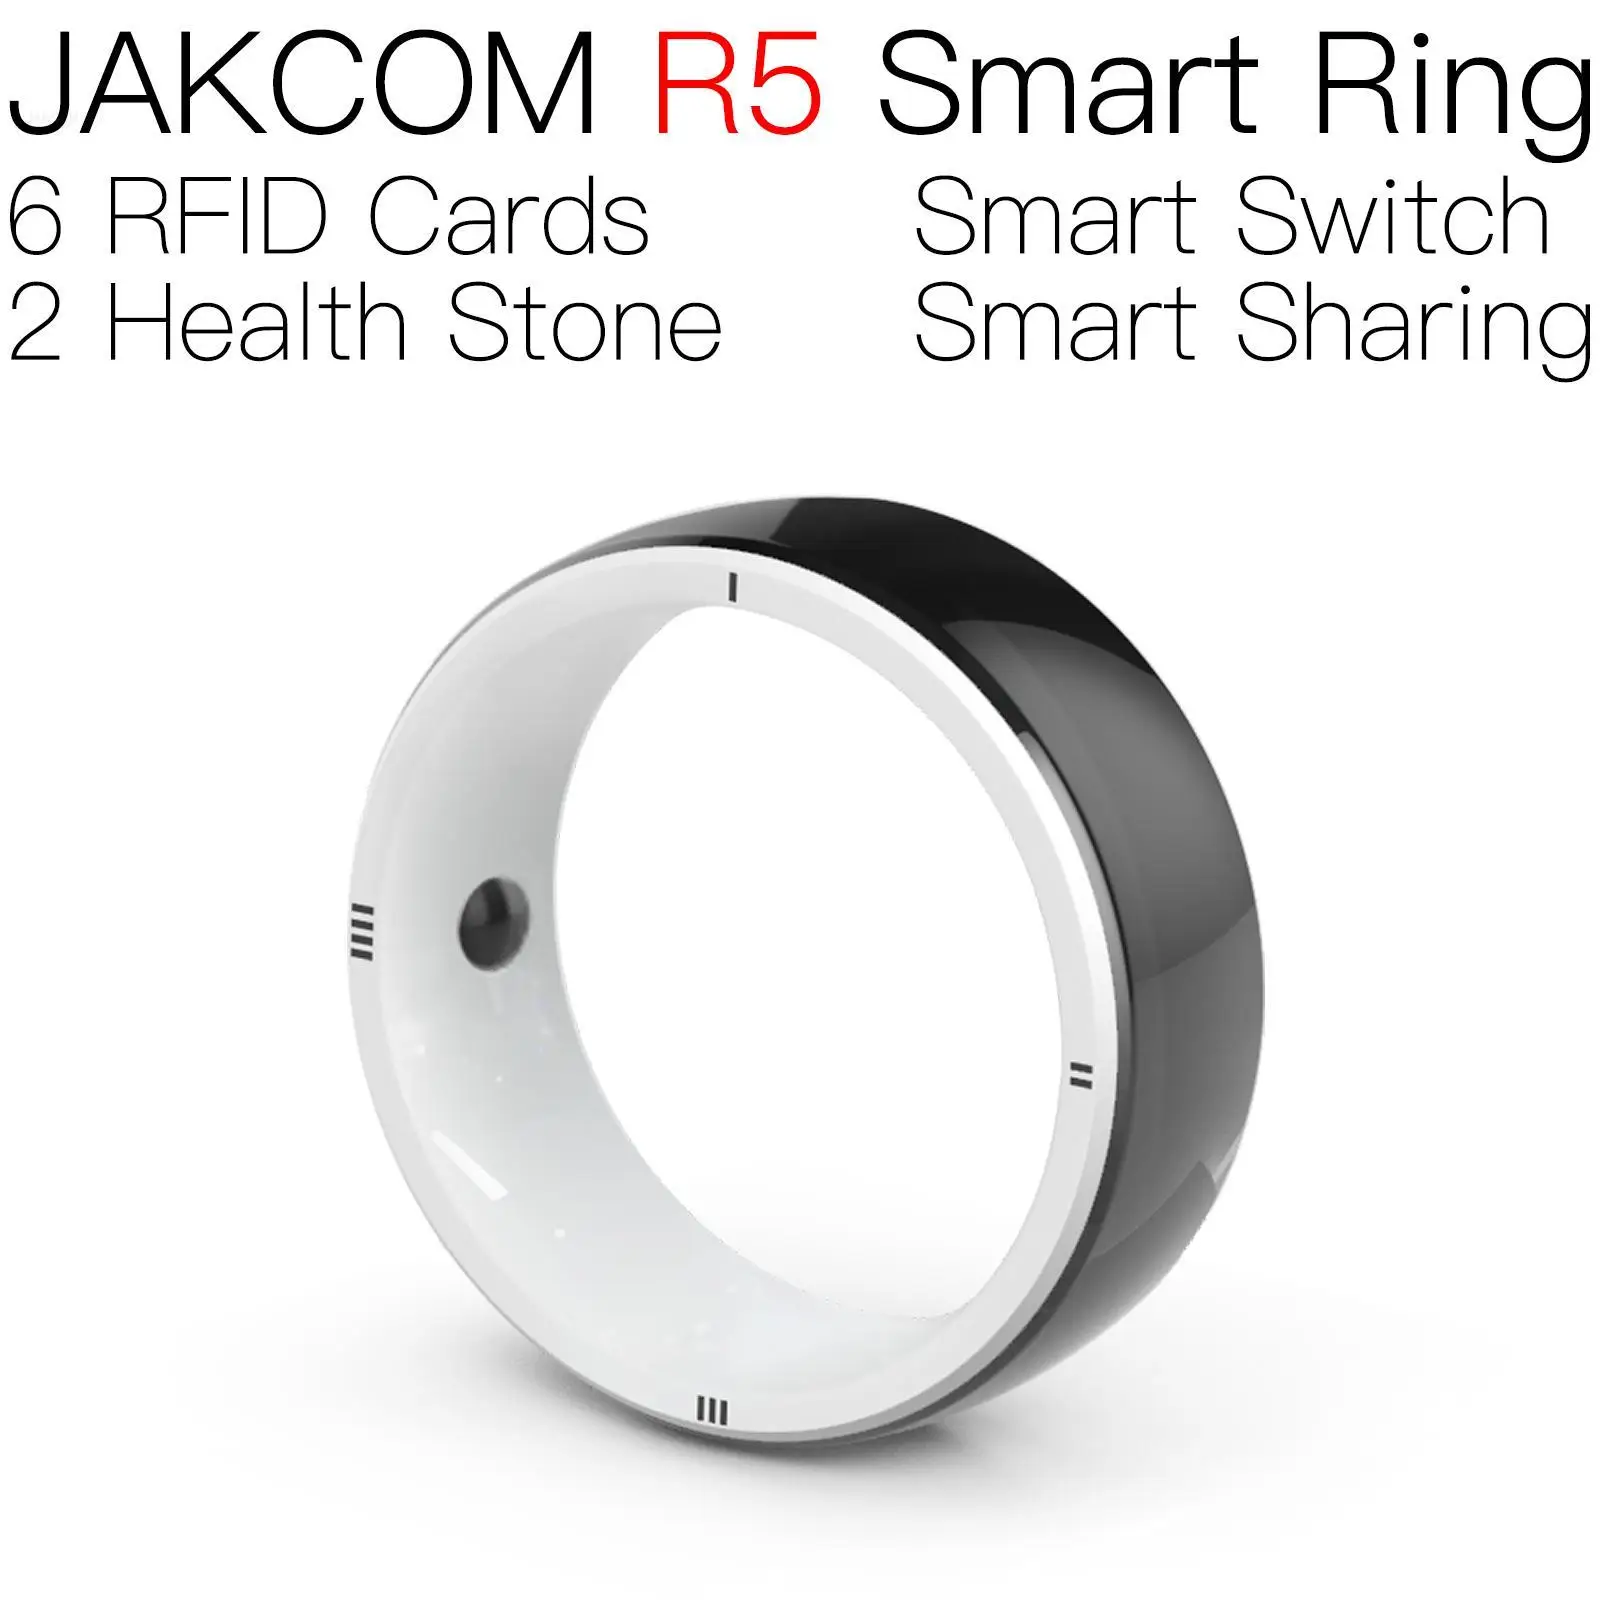 

JAKCOM R5 Smart Ring better than switch lite nfs rfid copy read write nfc with led card free chipin badge gris pvc 125khz tag